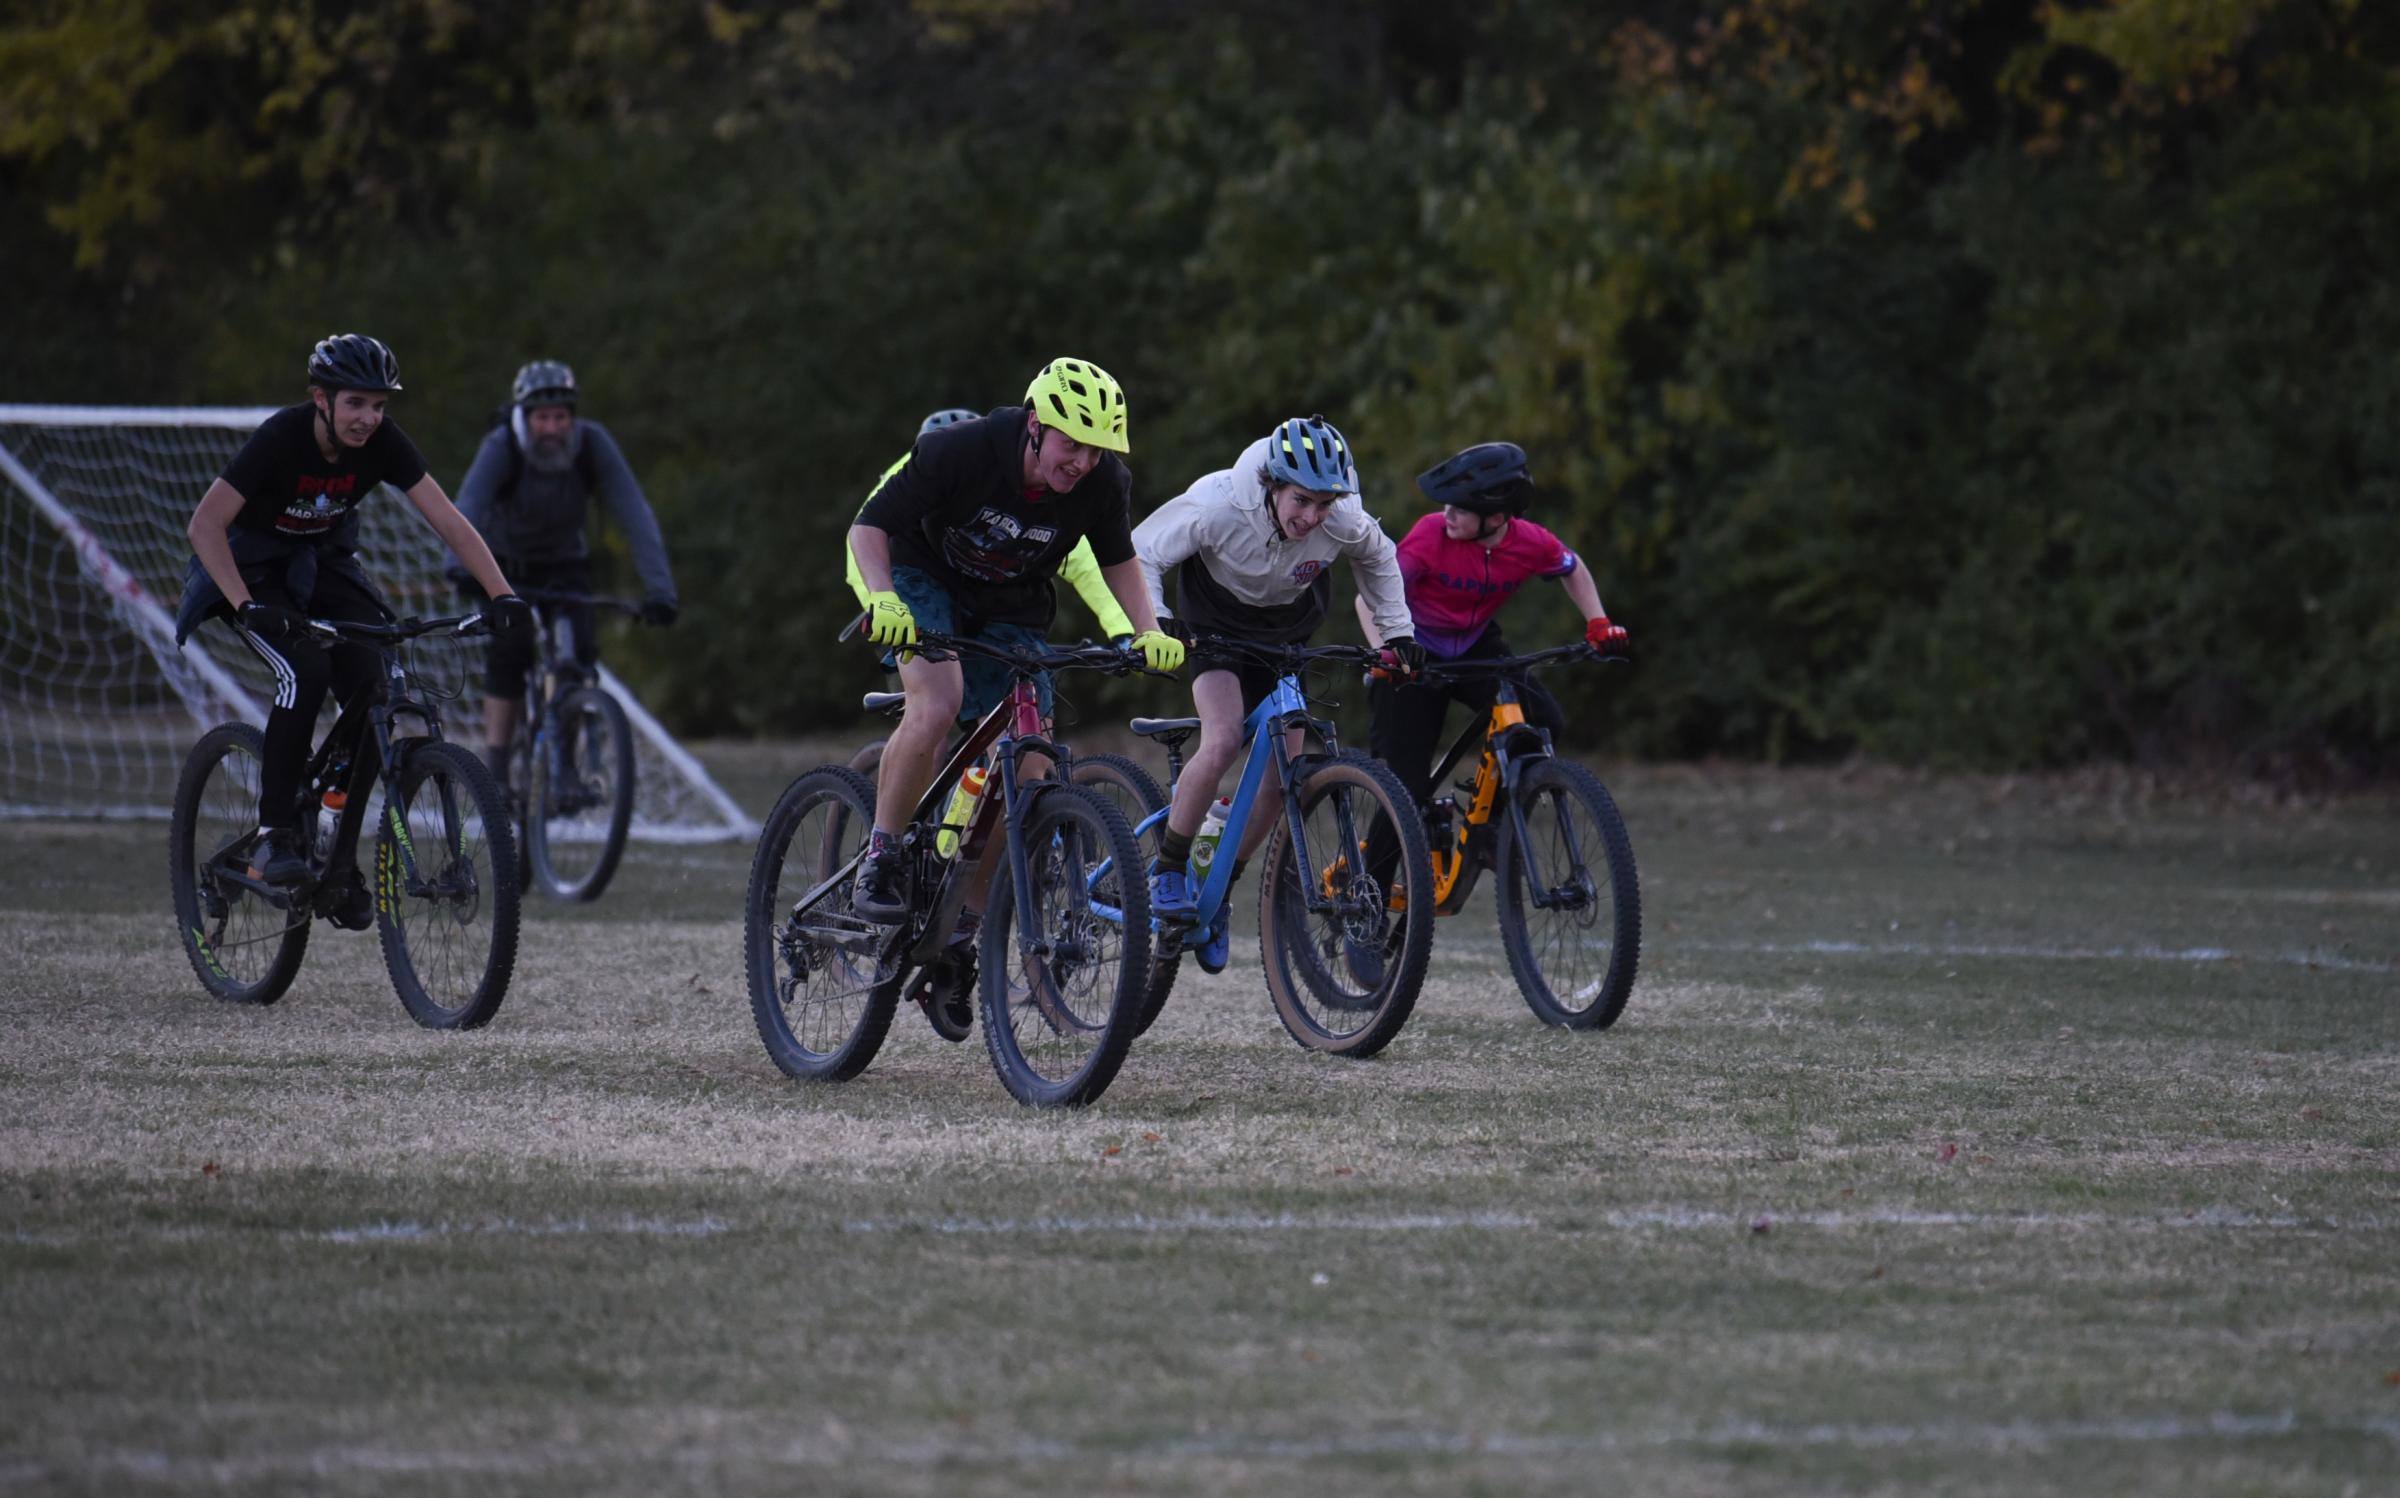 Community, competition and mountain biking